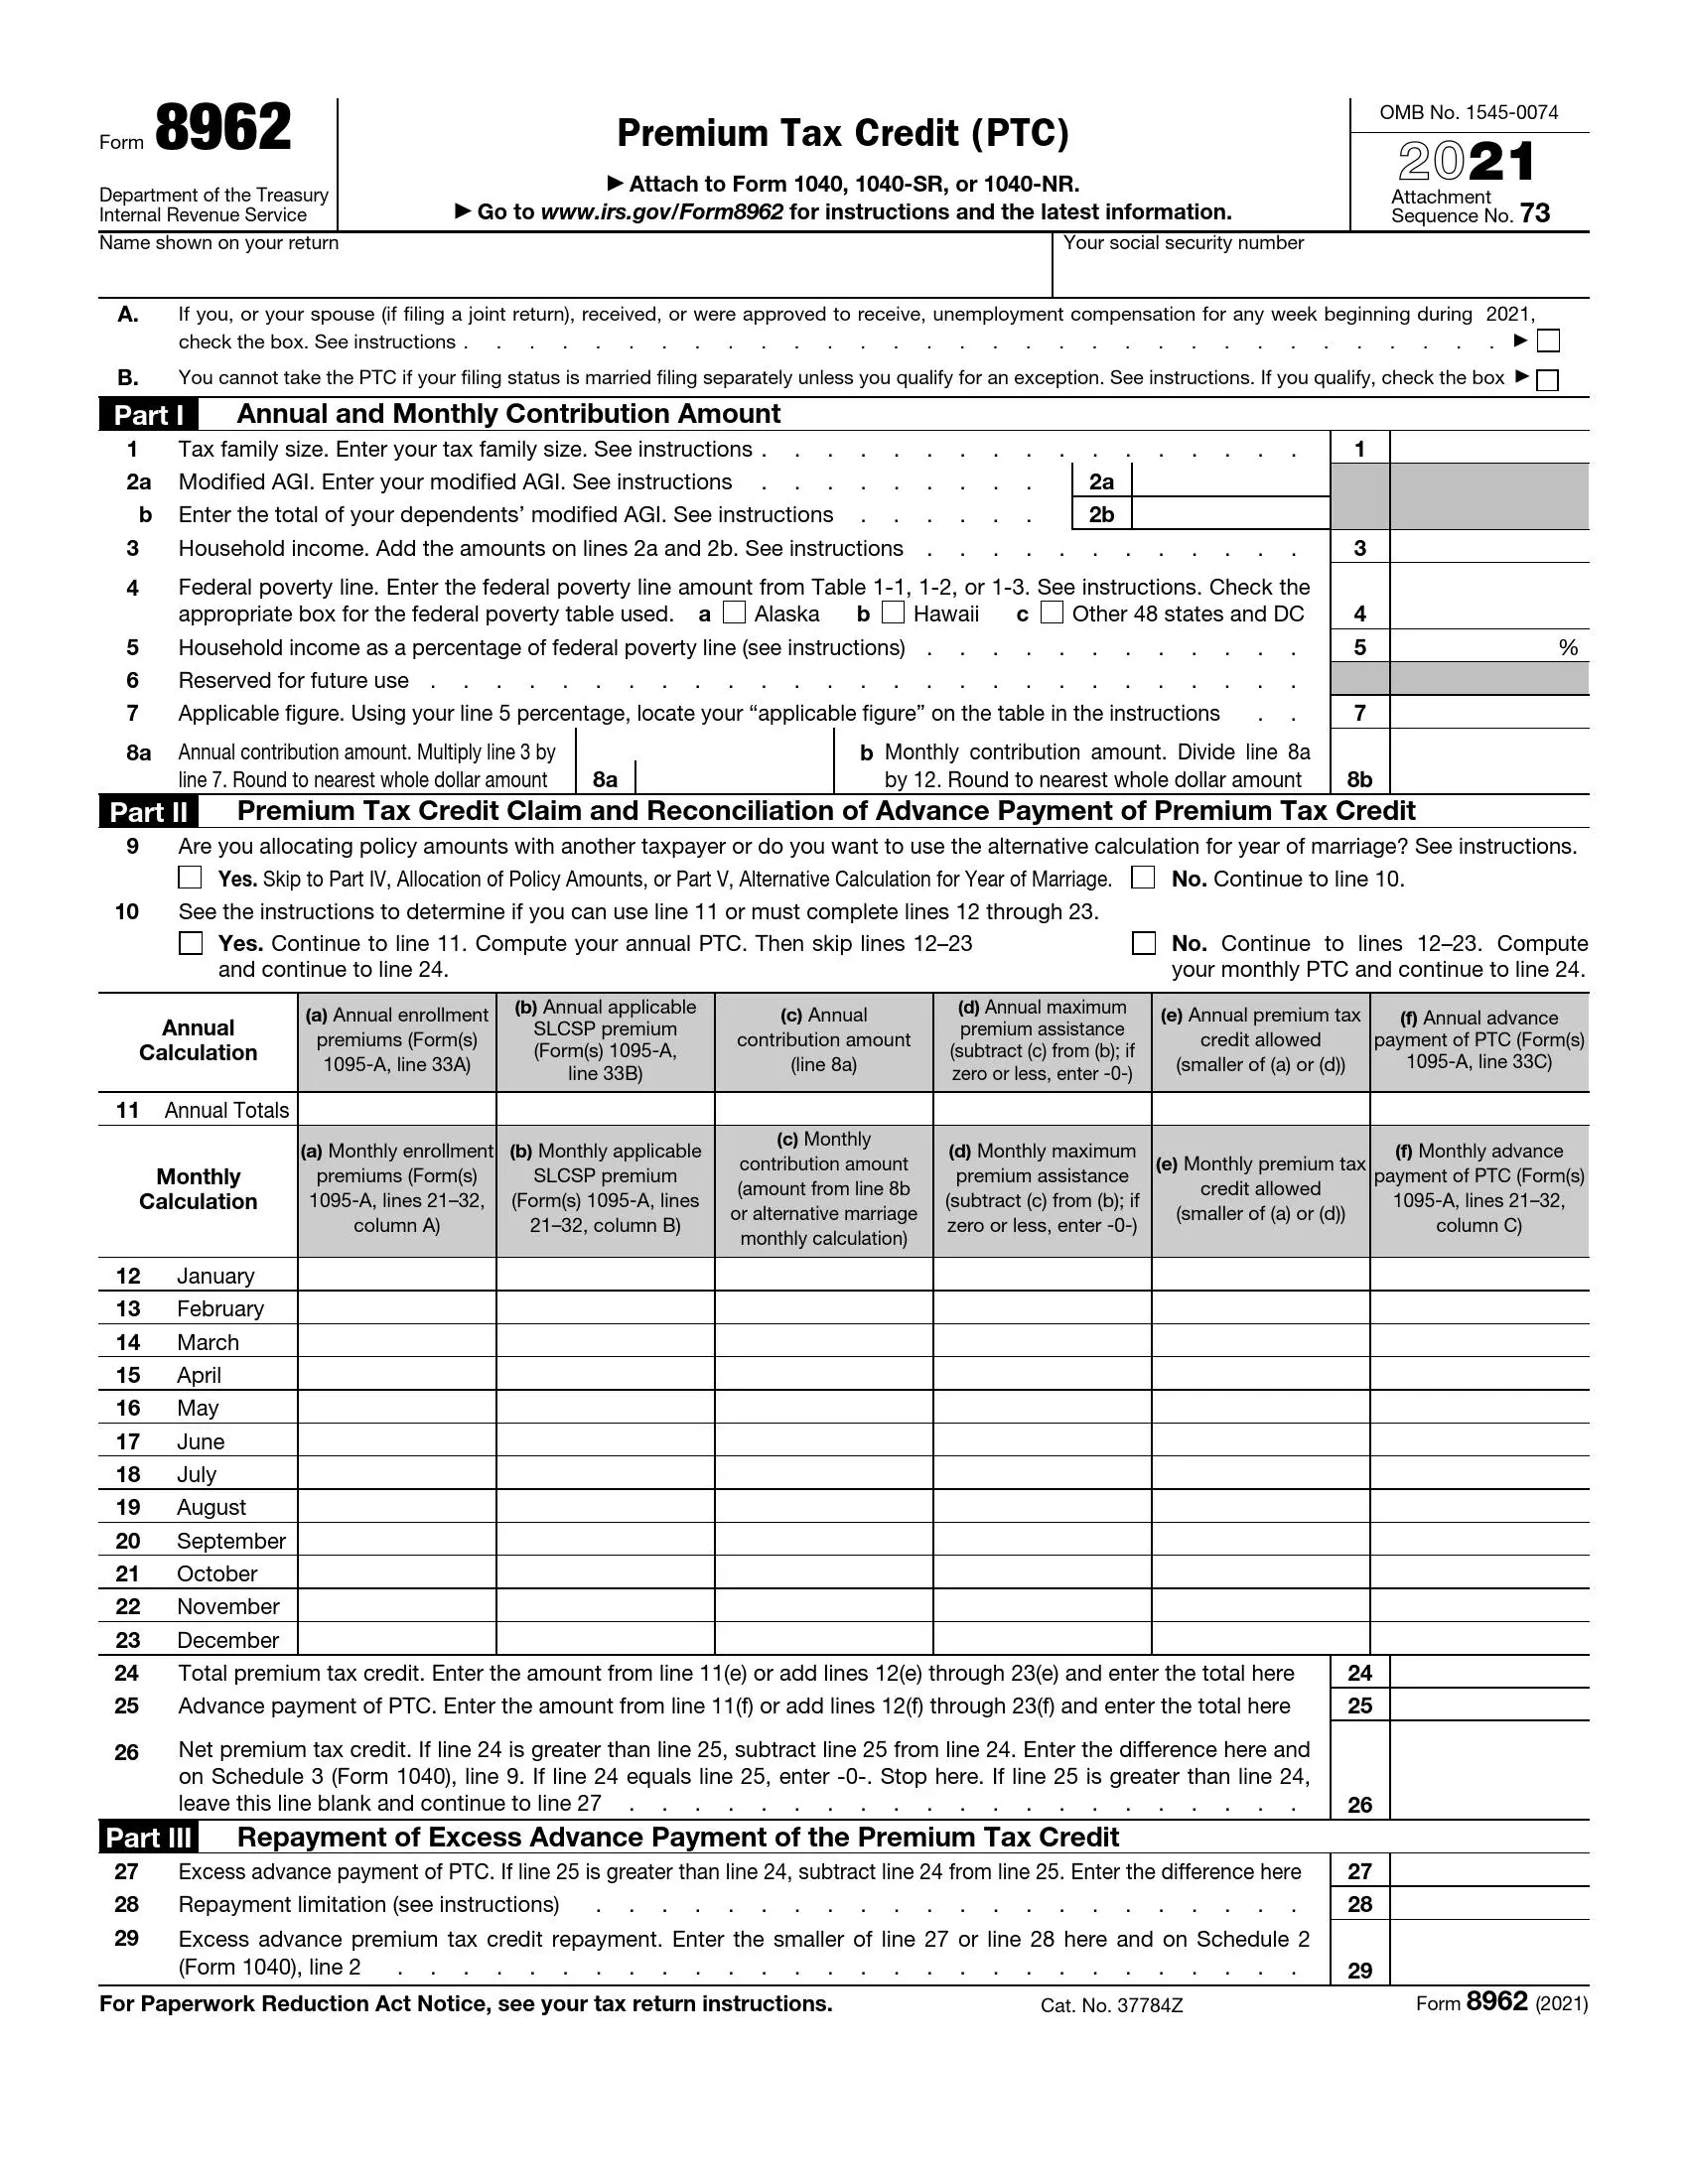 irs form 8962 2021 preview